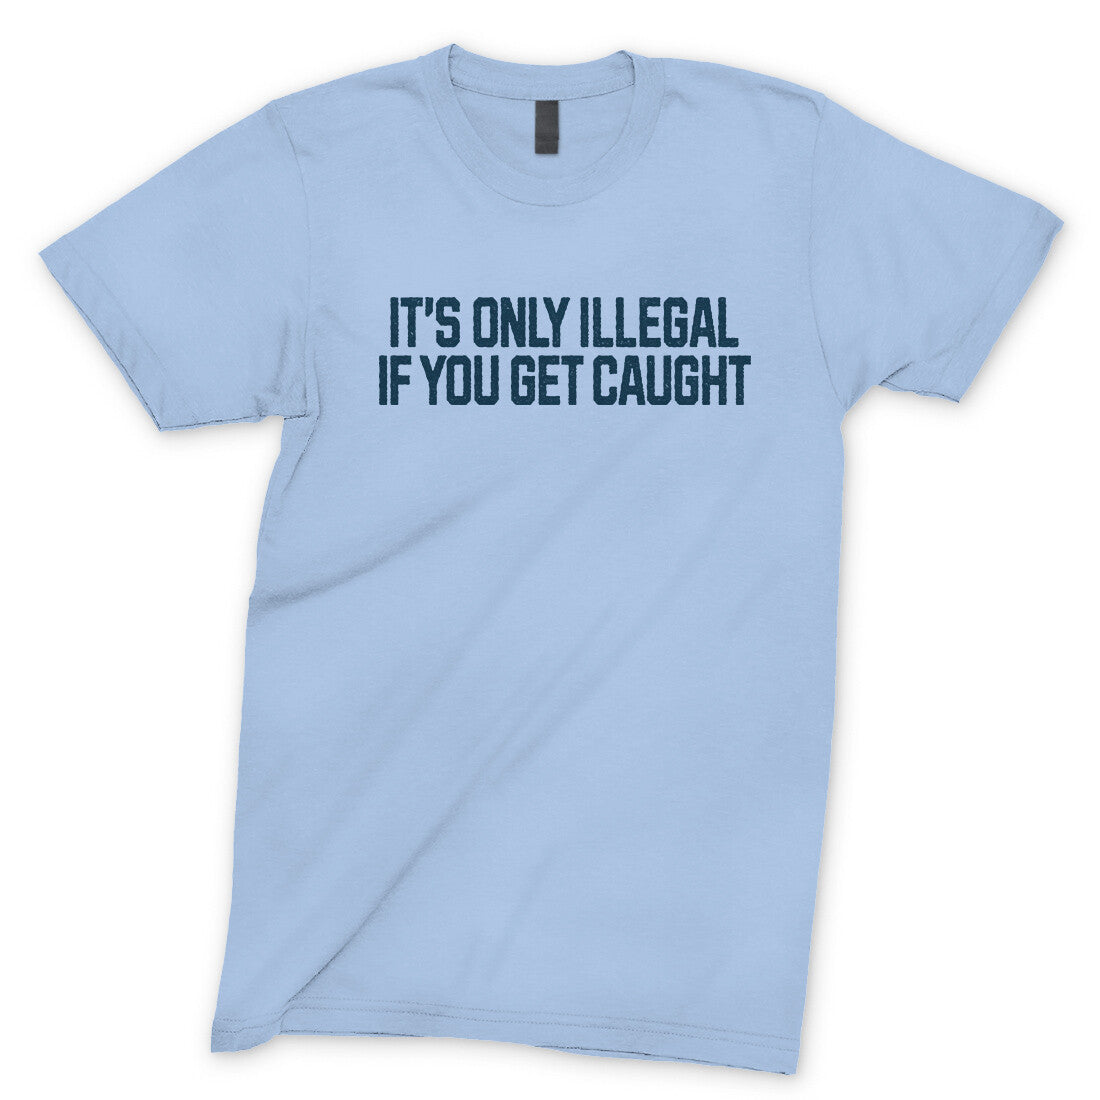 It’s Only Illegal If You Get Caught in Light Blue Color